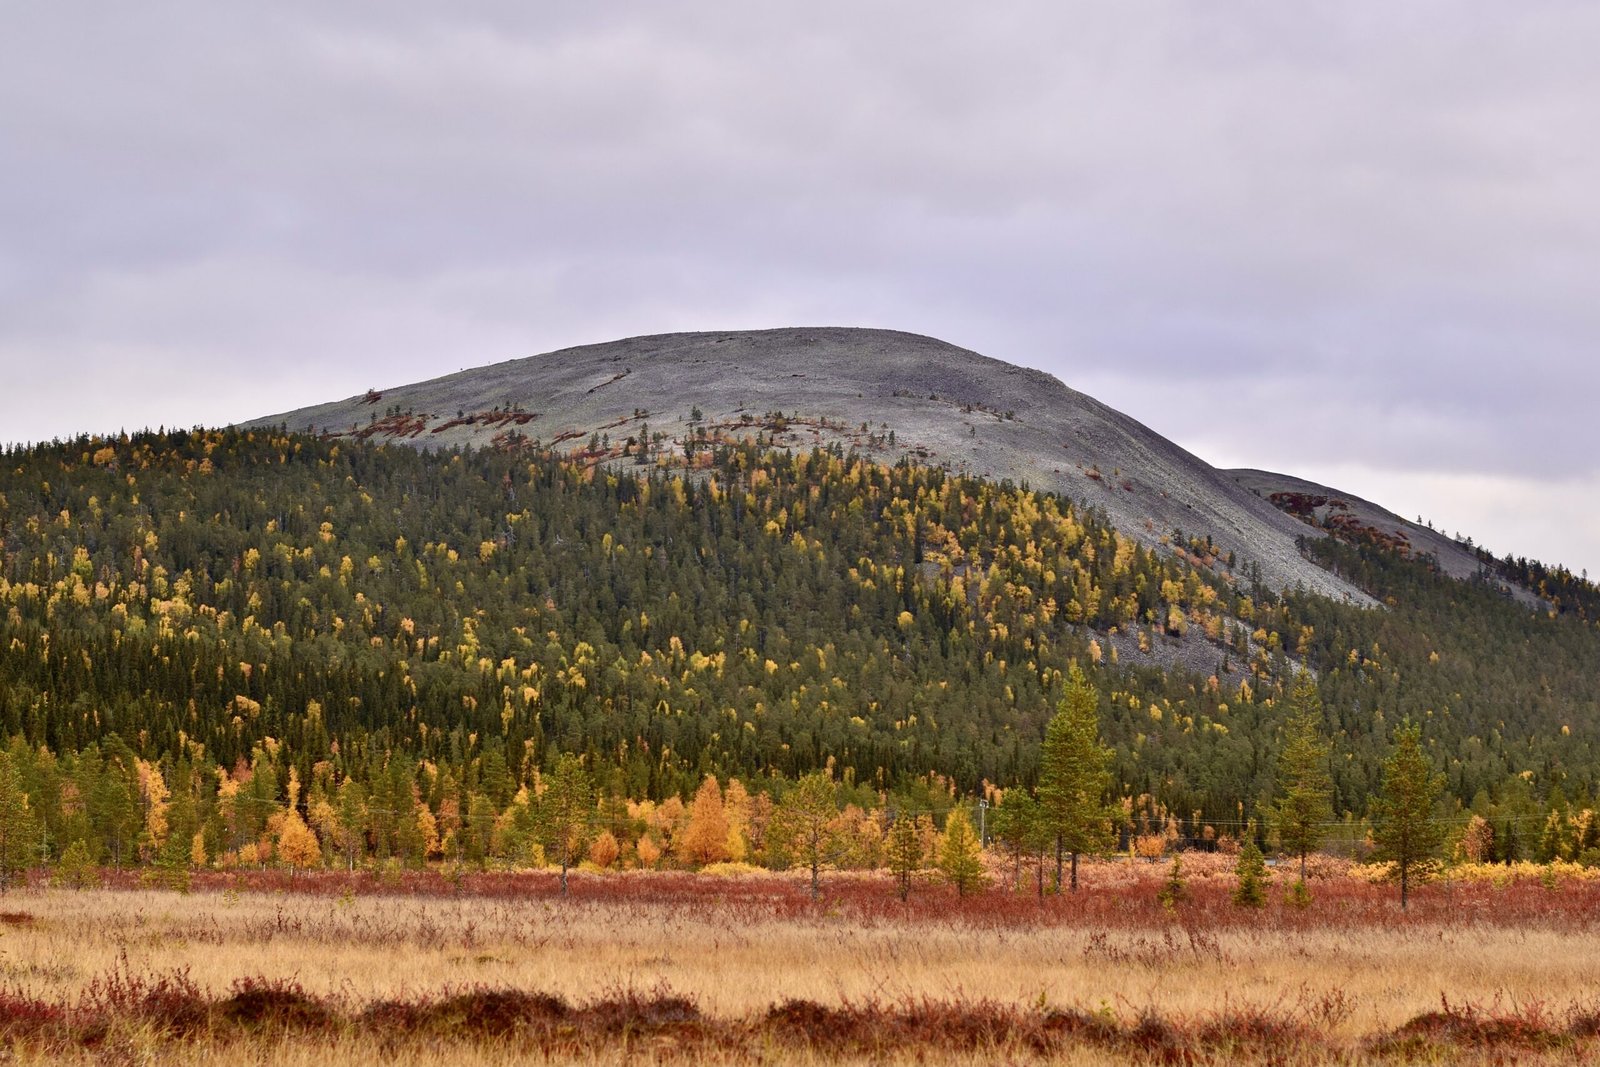 Landscape in Lapland during Fall by Meredith Chuzel